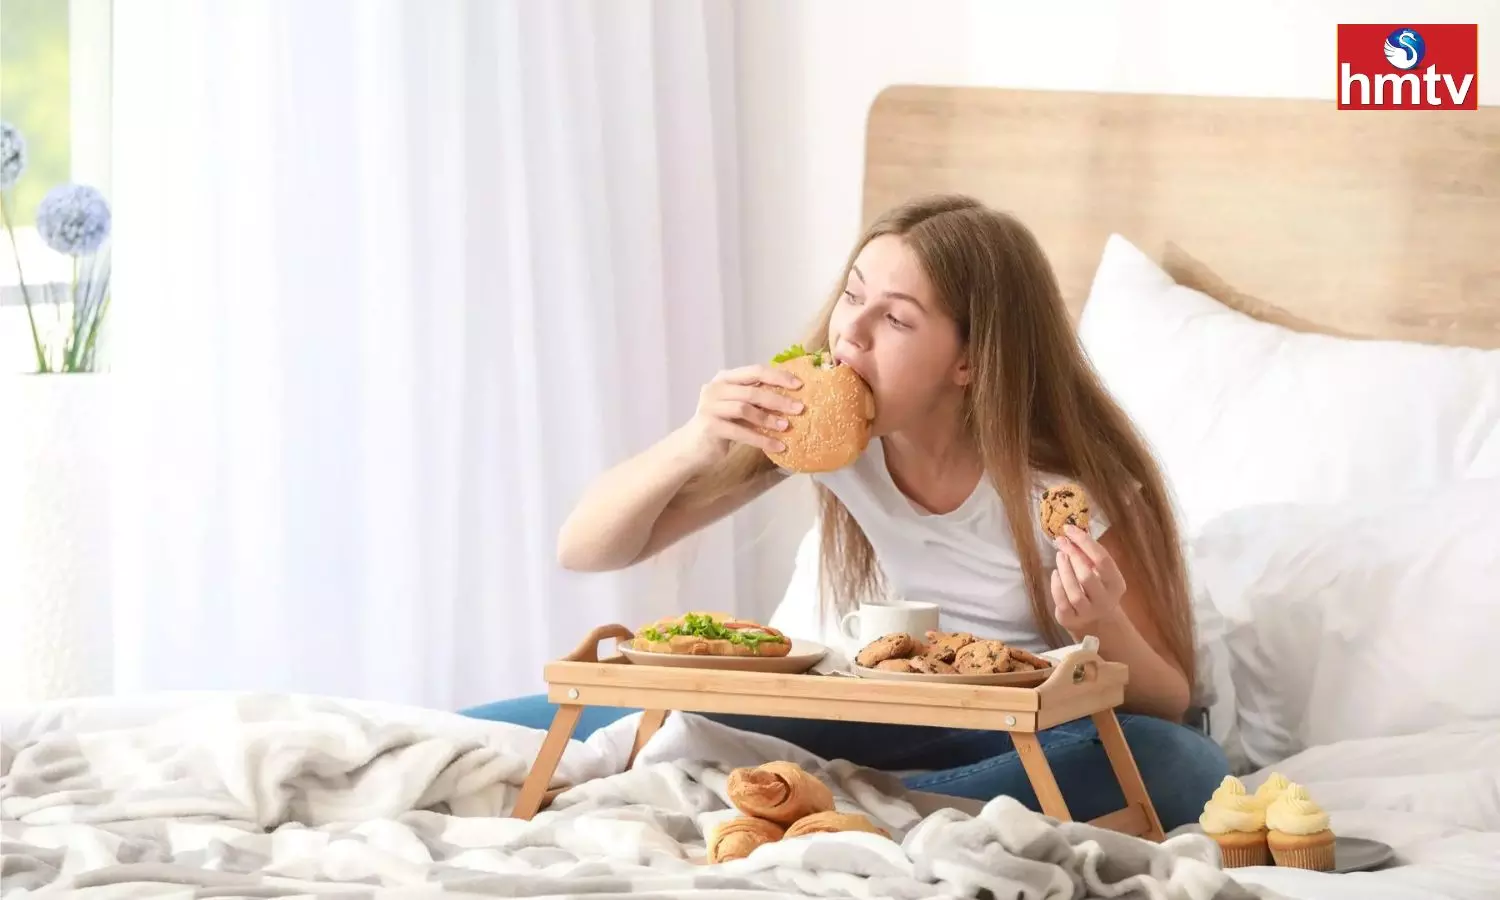 According To Astrology One Should Not Eat Food While Sitting On The Bed There Will Be Negative Effects